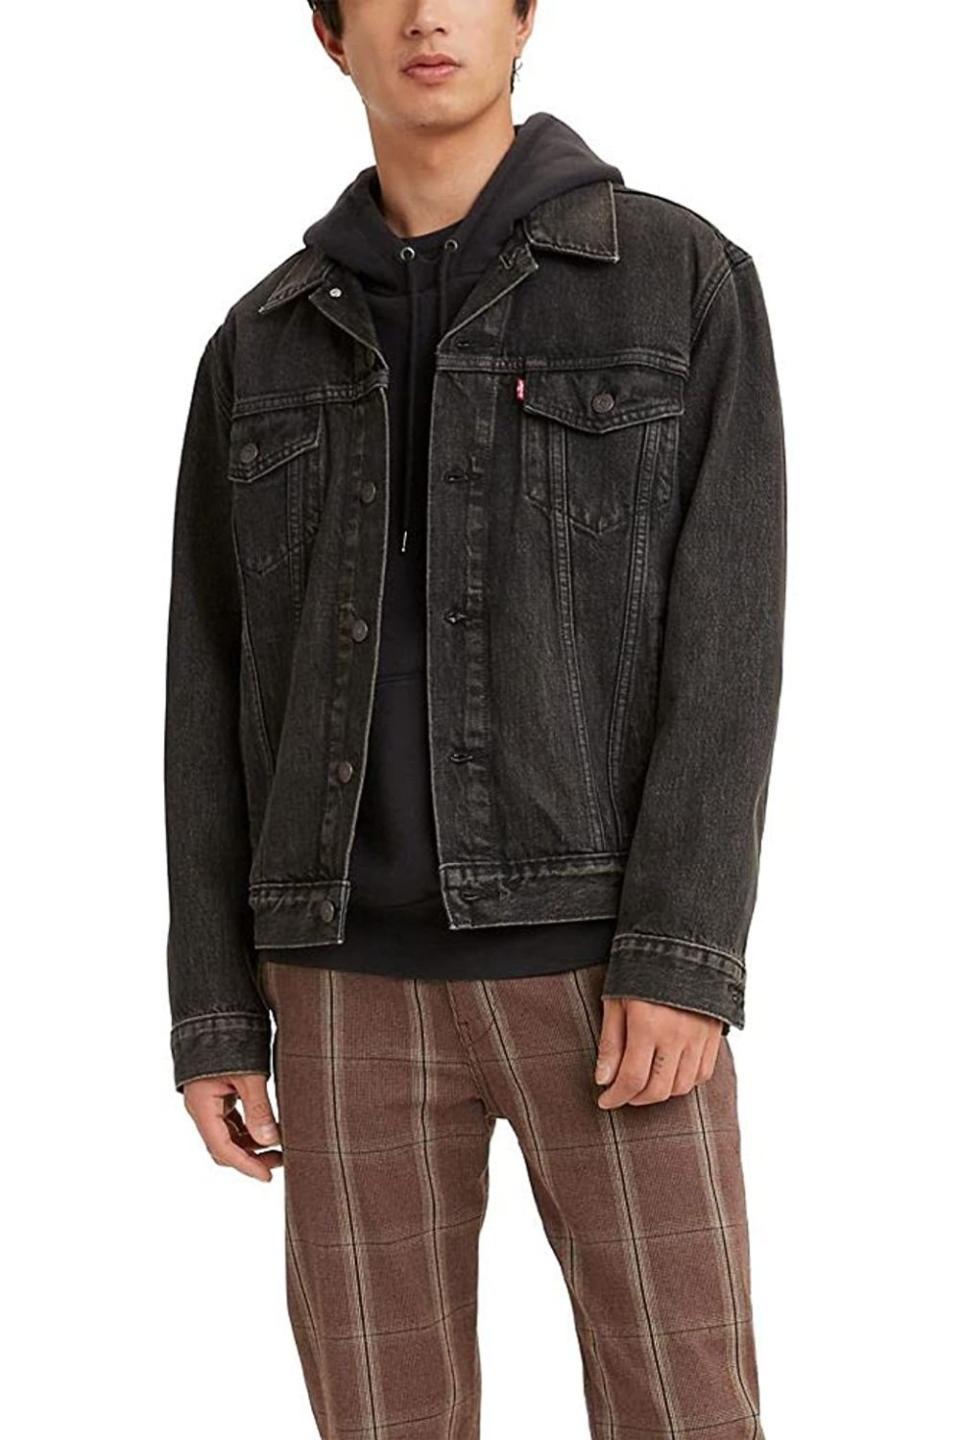 <p><strong>Levi's</strong></p><p>amazon.com</p><p><strong>$53.70</strong></p><p><a href="https://www.amazon.com/dp/B08P54B4Q7?tag=syn-yahoo-20&ascsubtag=%5Bartid%7C10049.g.8292641%5Bsrc%7Cyahoo-us" rel="nofollow noopener" target="_blank" data-ylk="slk:Shop Now" class="link ">Shop Now</a></p><p>A denim jacket is a great wardrobe staple, but the traditional blue can feel unoriginal. Get him a faded black denim one like this to boost his edge factor.</p><p><strong>Glowing Review</strong>: <em>"It had just the right amount of bagginess I wanted and it perfected the outfit I had envisioned. <a href="https://www.amazon.com/gp/customer-reviews/R1O1Z42MXWXI1U/ref=cm_cr_arp_d_rvw_ttl?ie=UTF8&ASIN=B09G7WWFXN&tag=syn-yahoo-20&ascsubtag=%5Bartid%7C10049.g.8292641%5Bsrc%7Cyahoo-us" rel="nofollow noopener" target="_blank" data-ylk="slk:Very happy" class="link ">Very happy</a>!"</em></p>